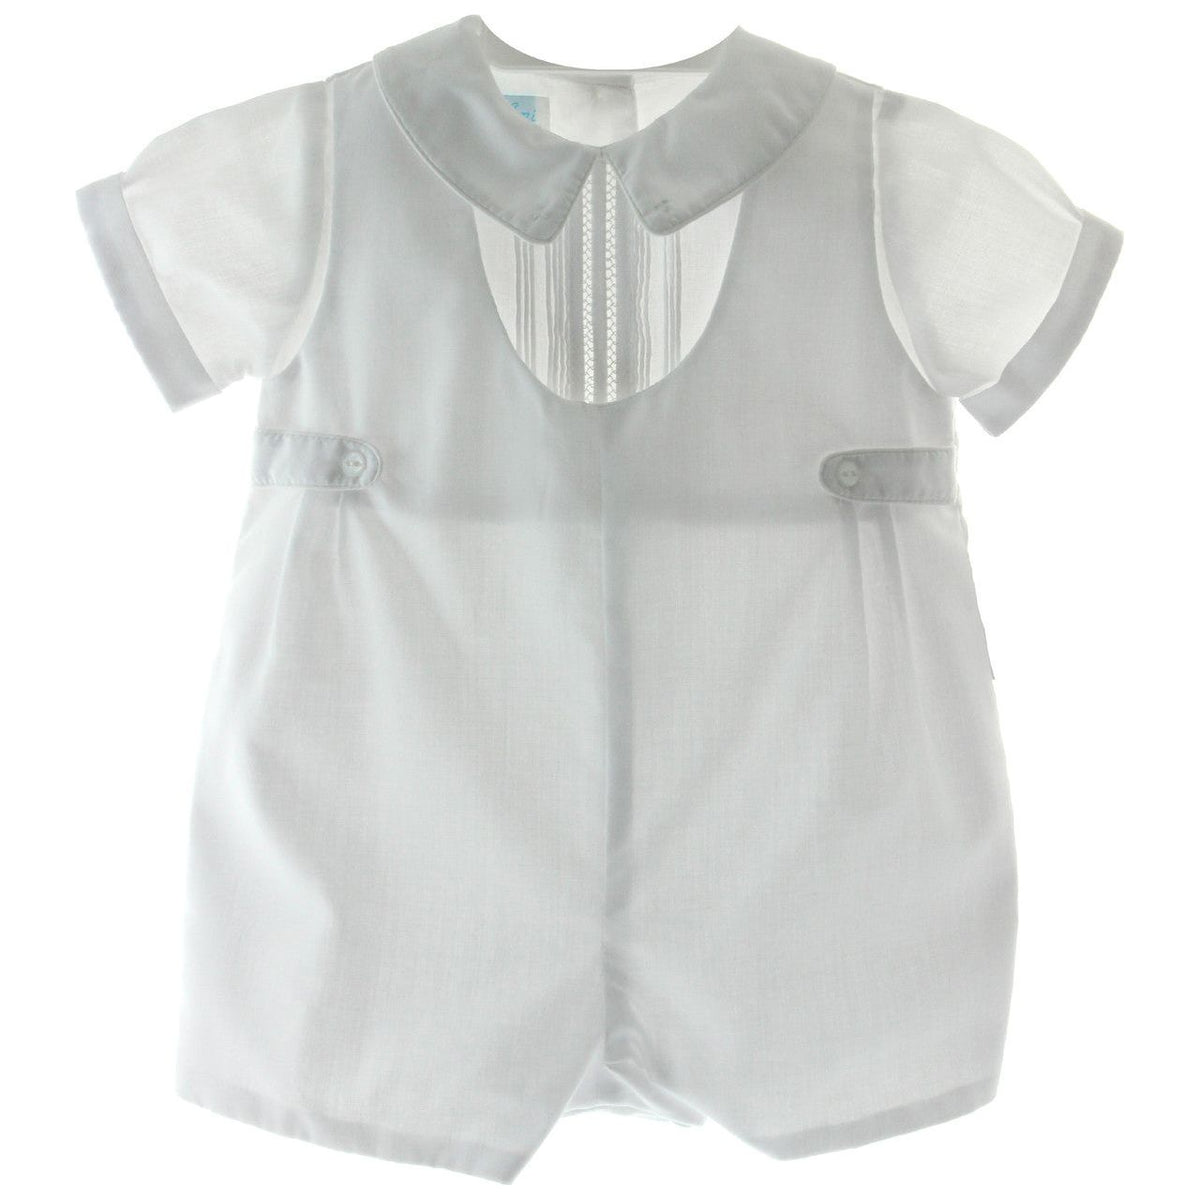 Boys White Baptism Christening Outfit with Side Tabs